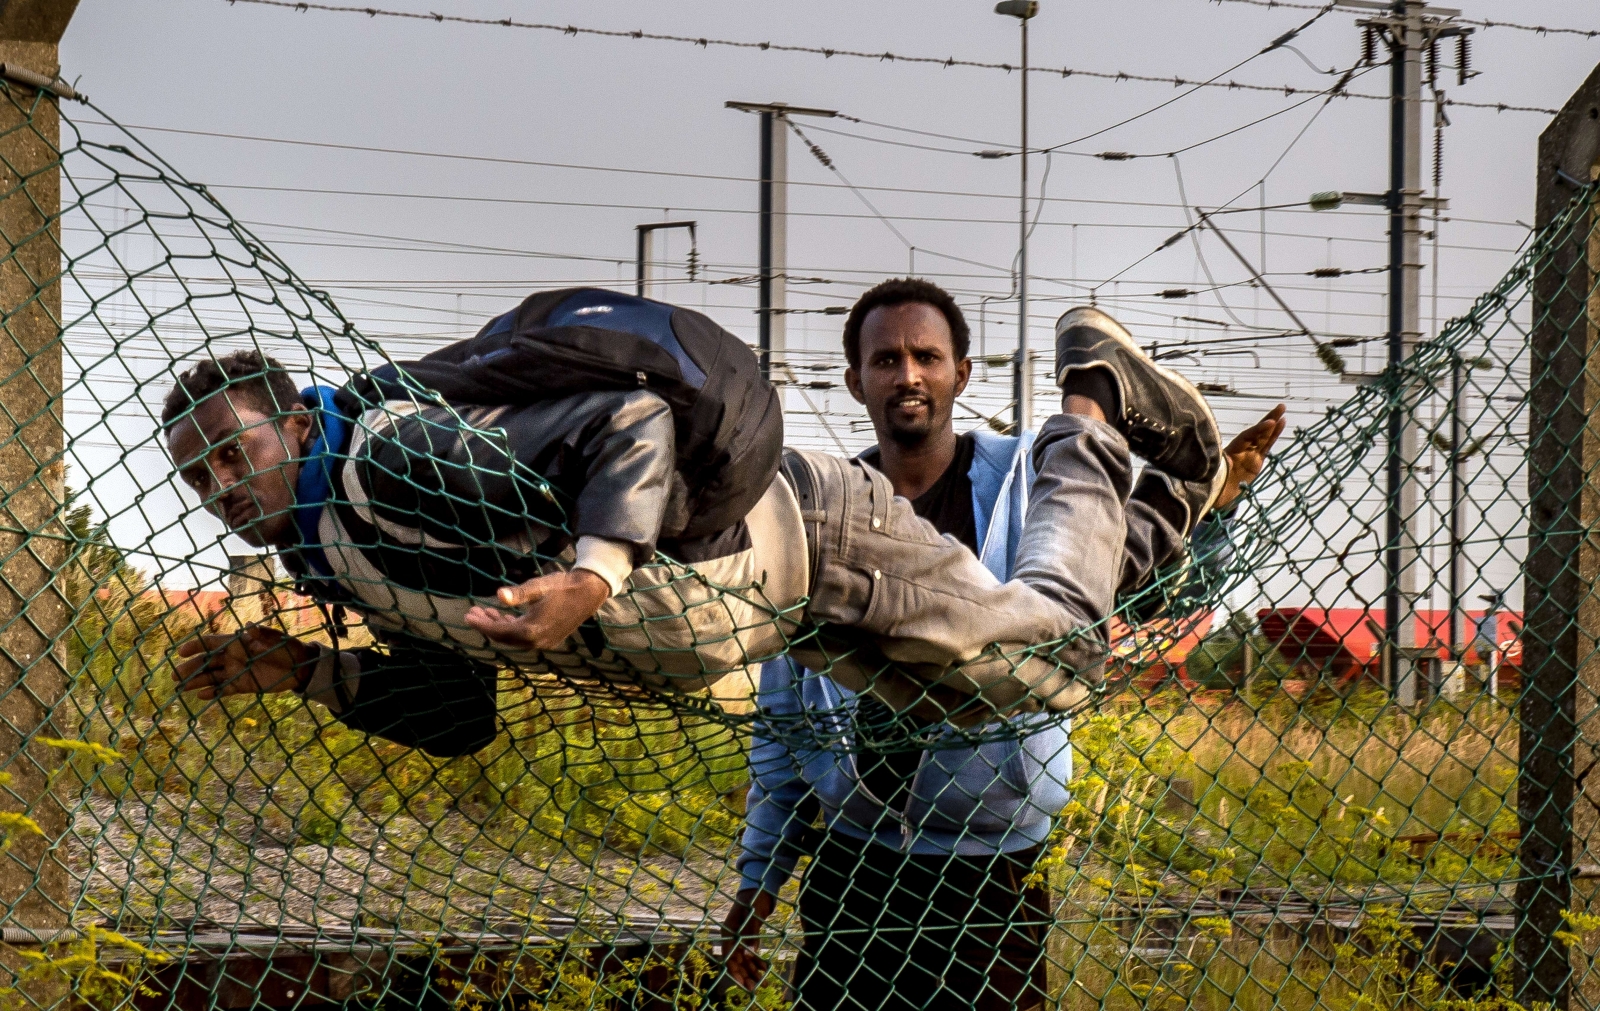 Catalogue Of Death Calais Migrant Toll Spikes As Border Controls Take Hold